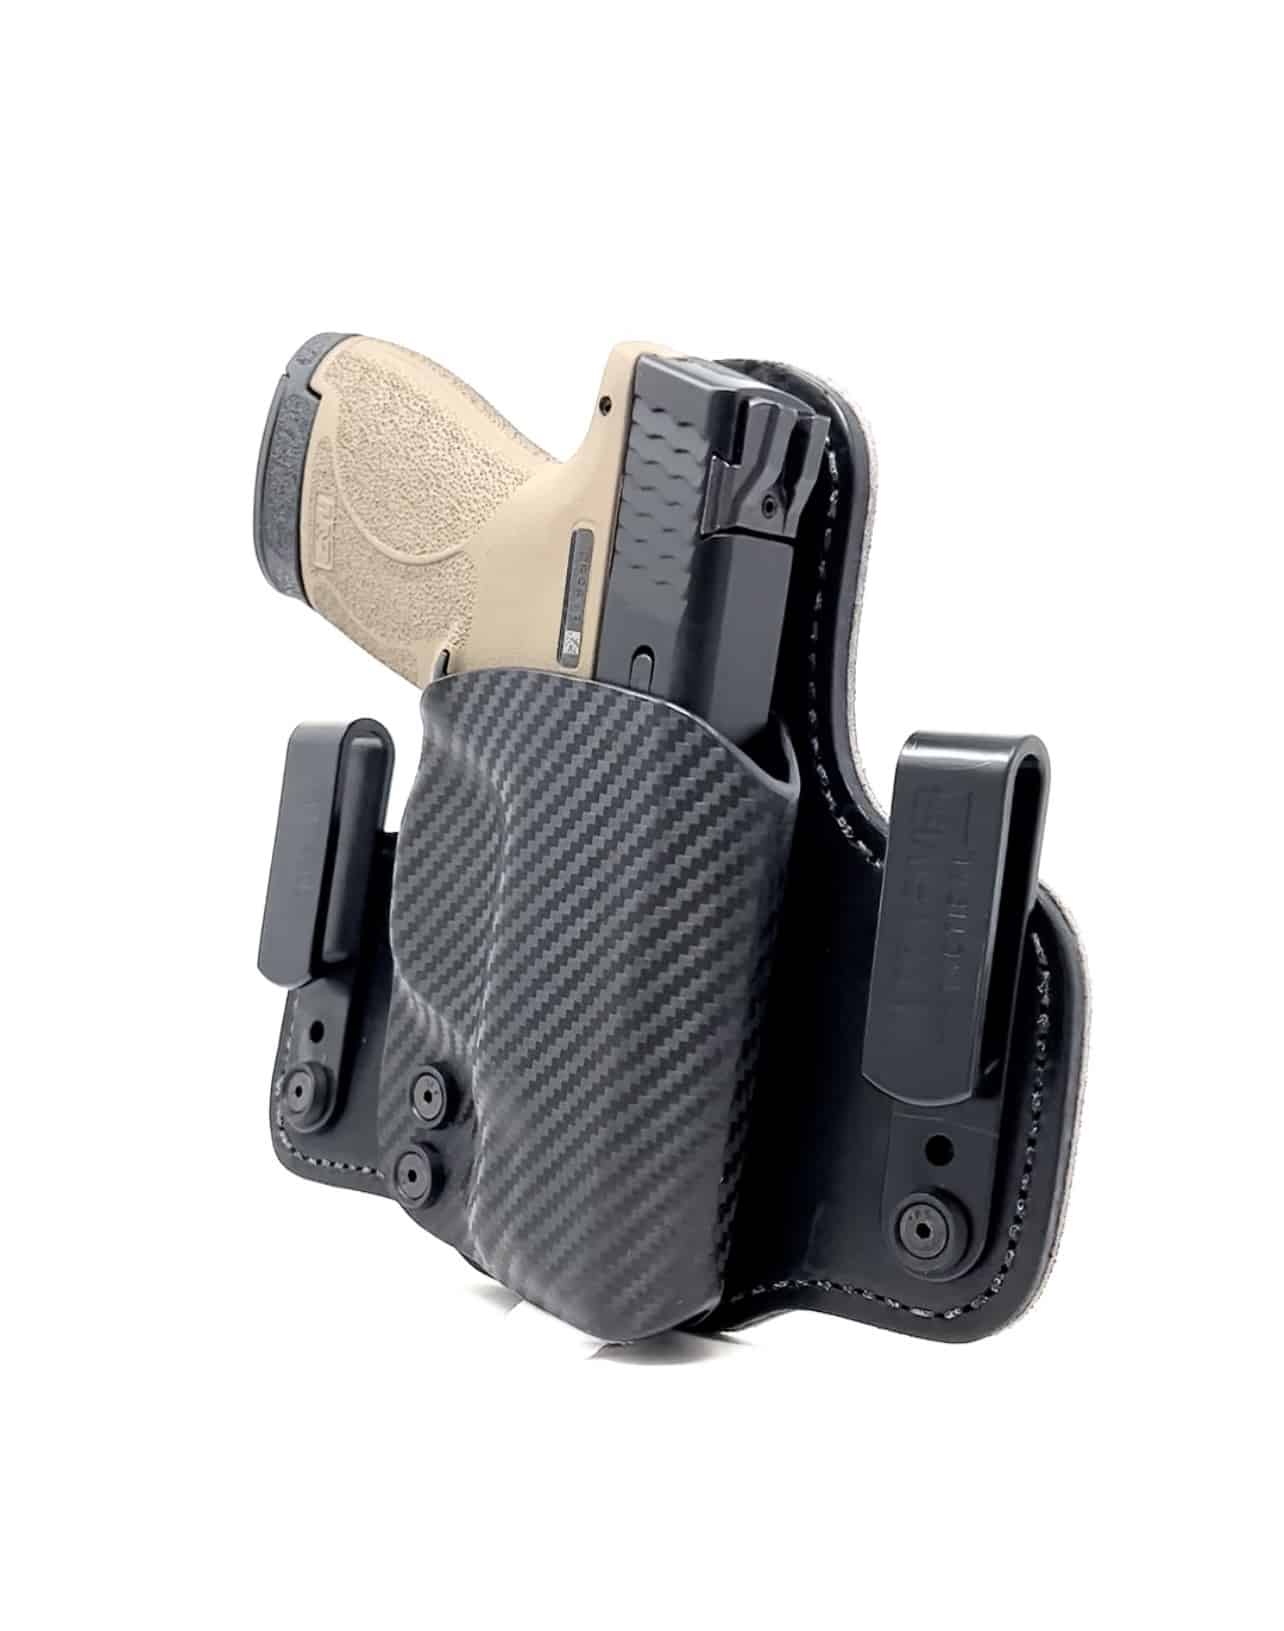 OWB Kydex/Leather Hybrid Holster with adjustable retention for Steyr 